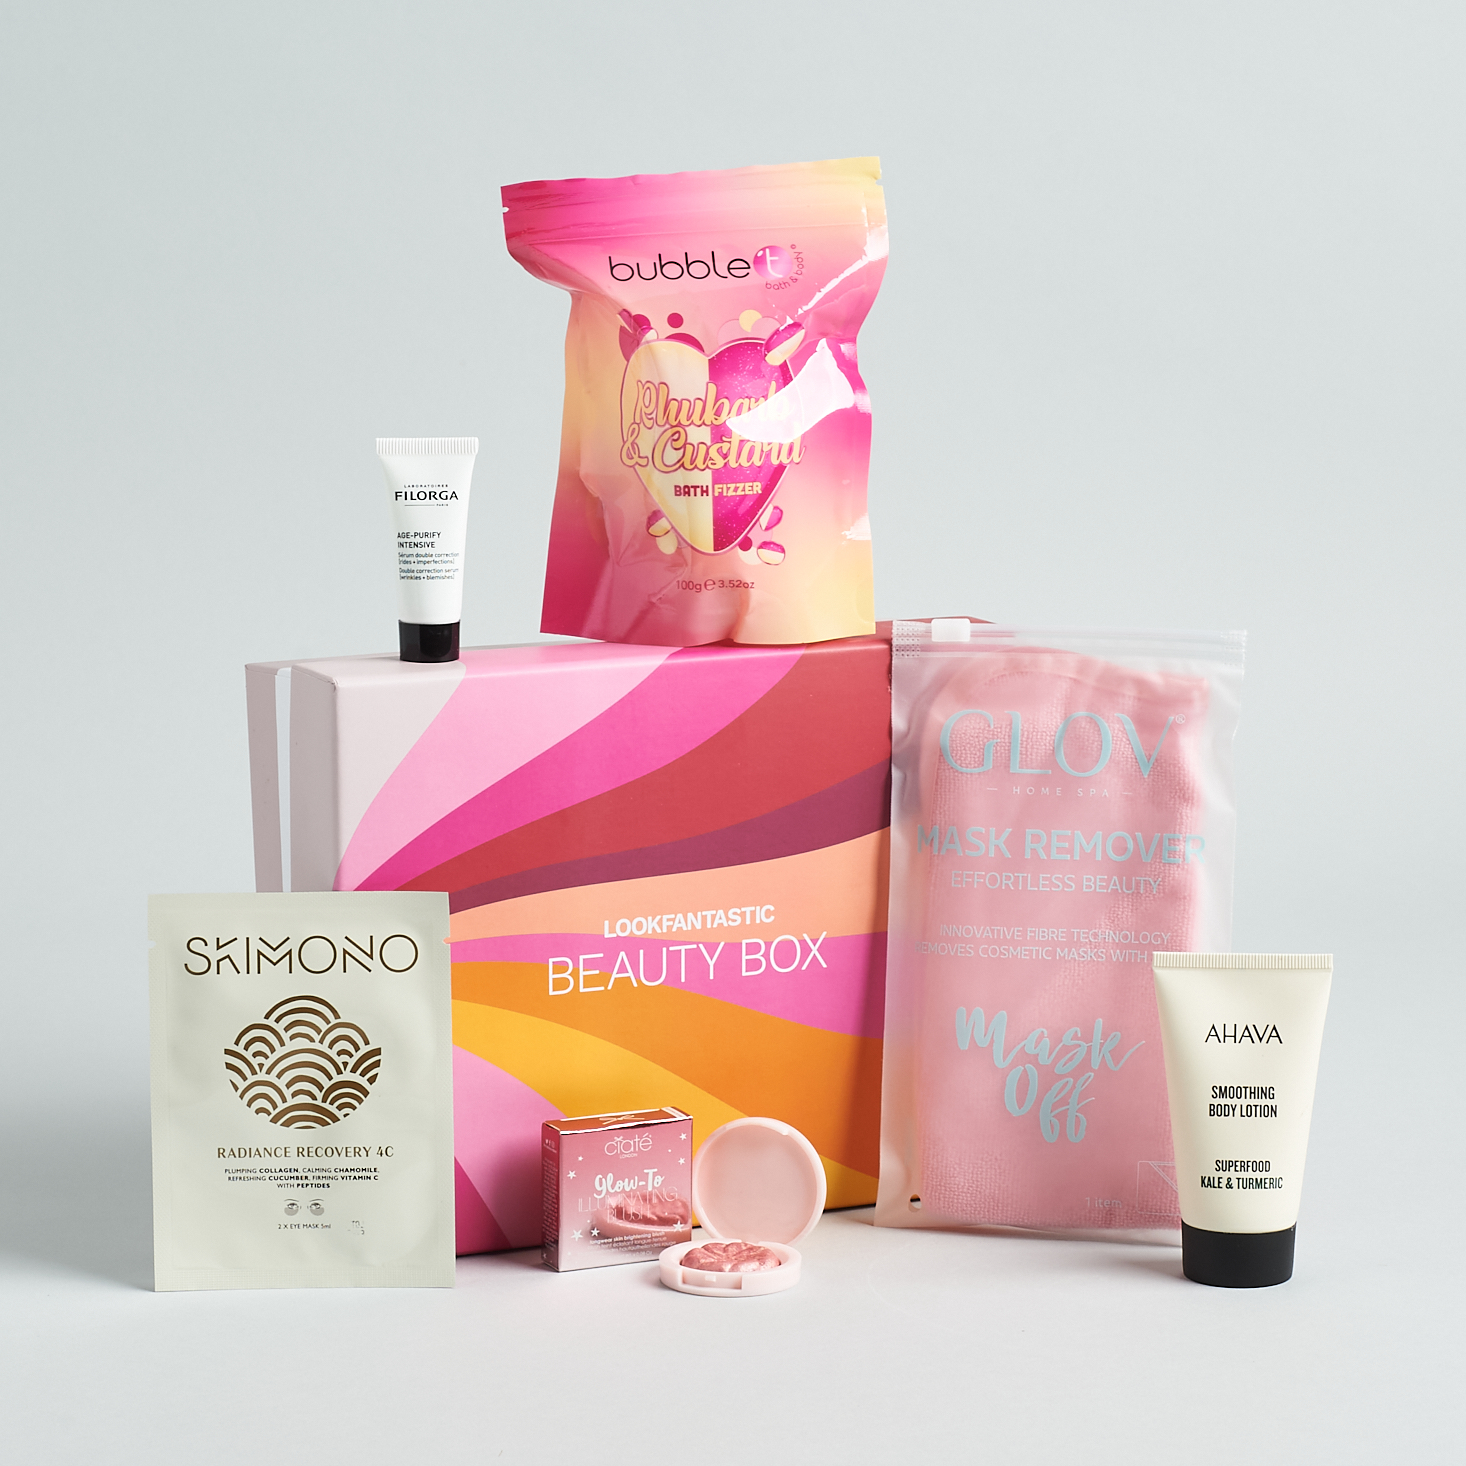 Lookfantastic Beauty Box August 2021 Review